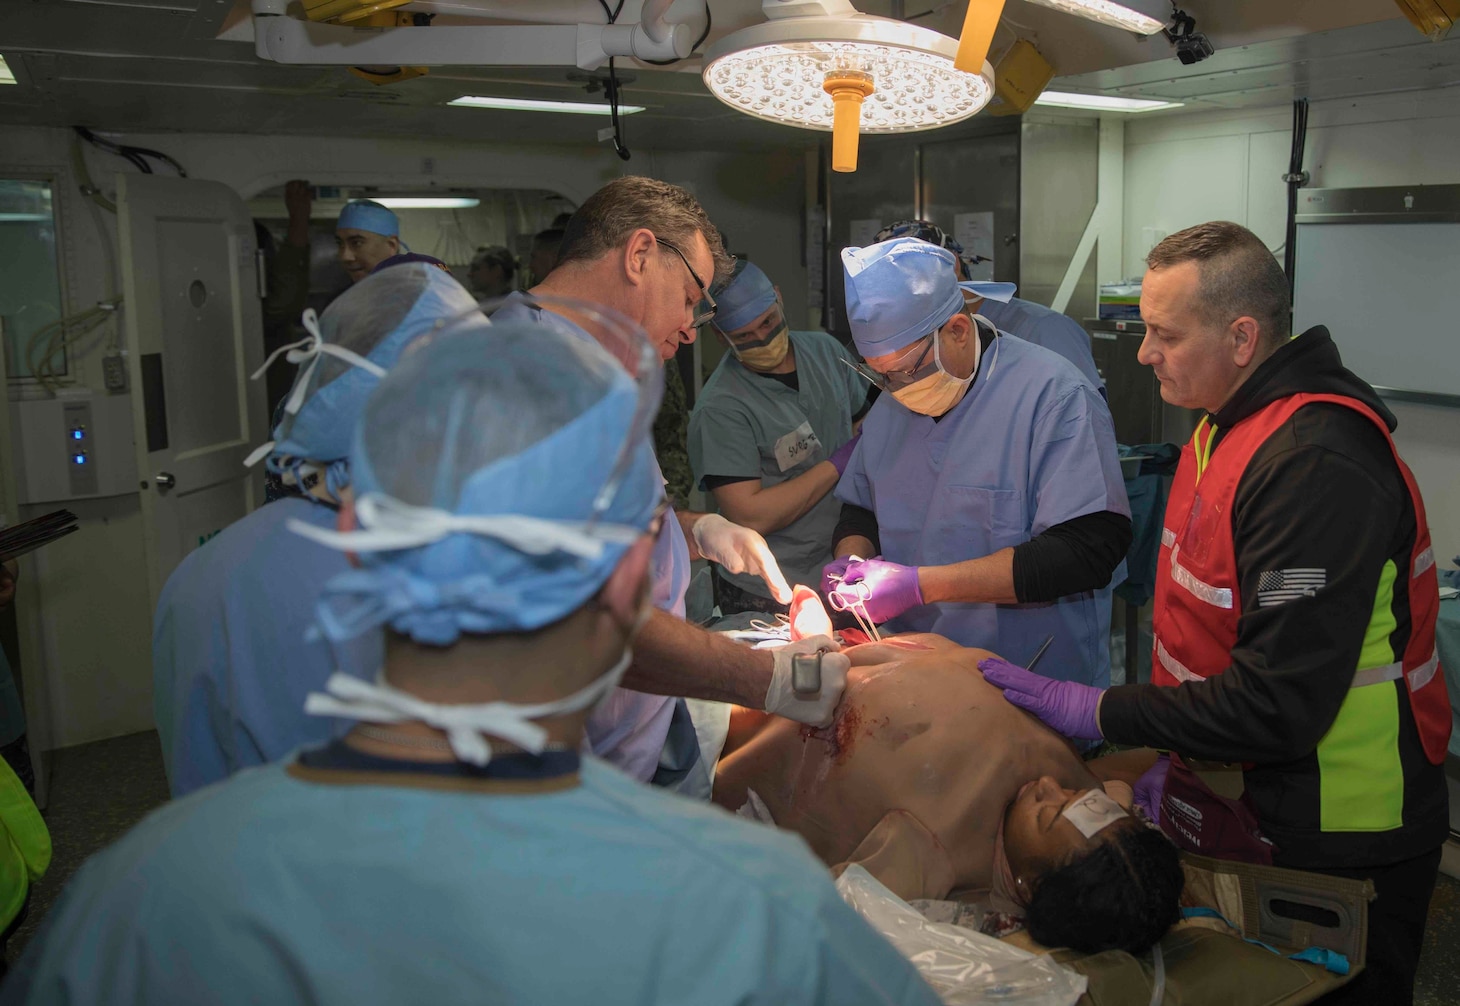 Sailors from Fleet Surgical Team 6 treat a simulated patient aboard the amphibious assault ship USS Bataan (LHD 5) in the operating room during a medical mass casualty drill.